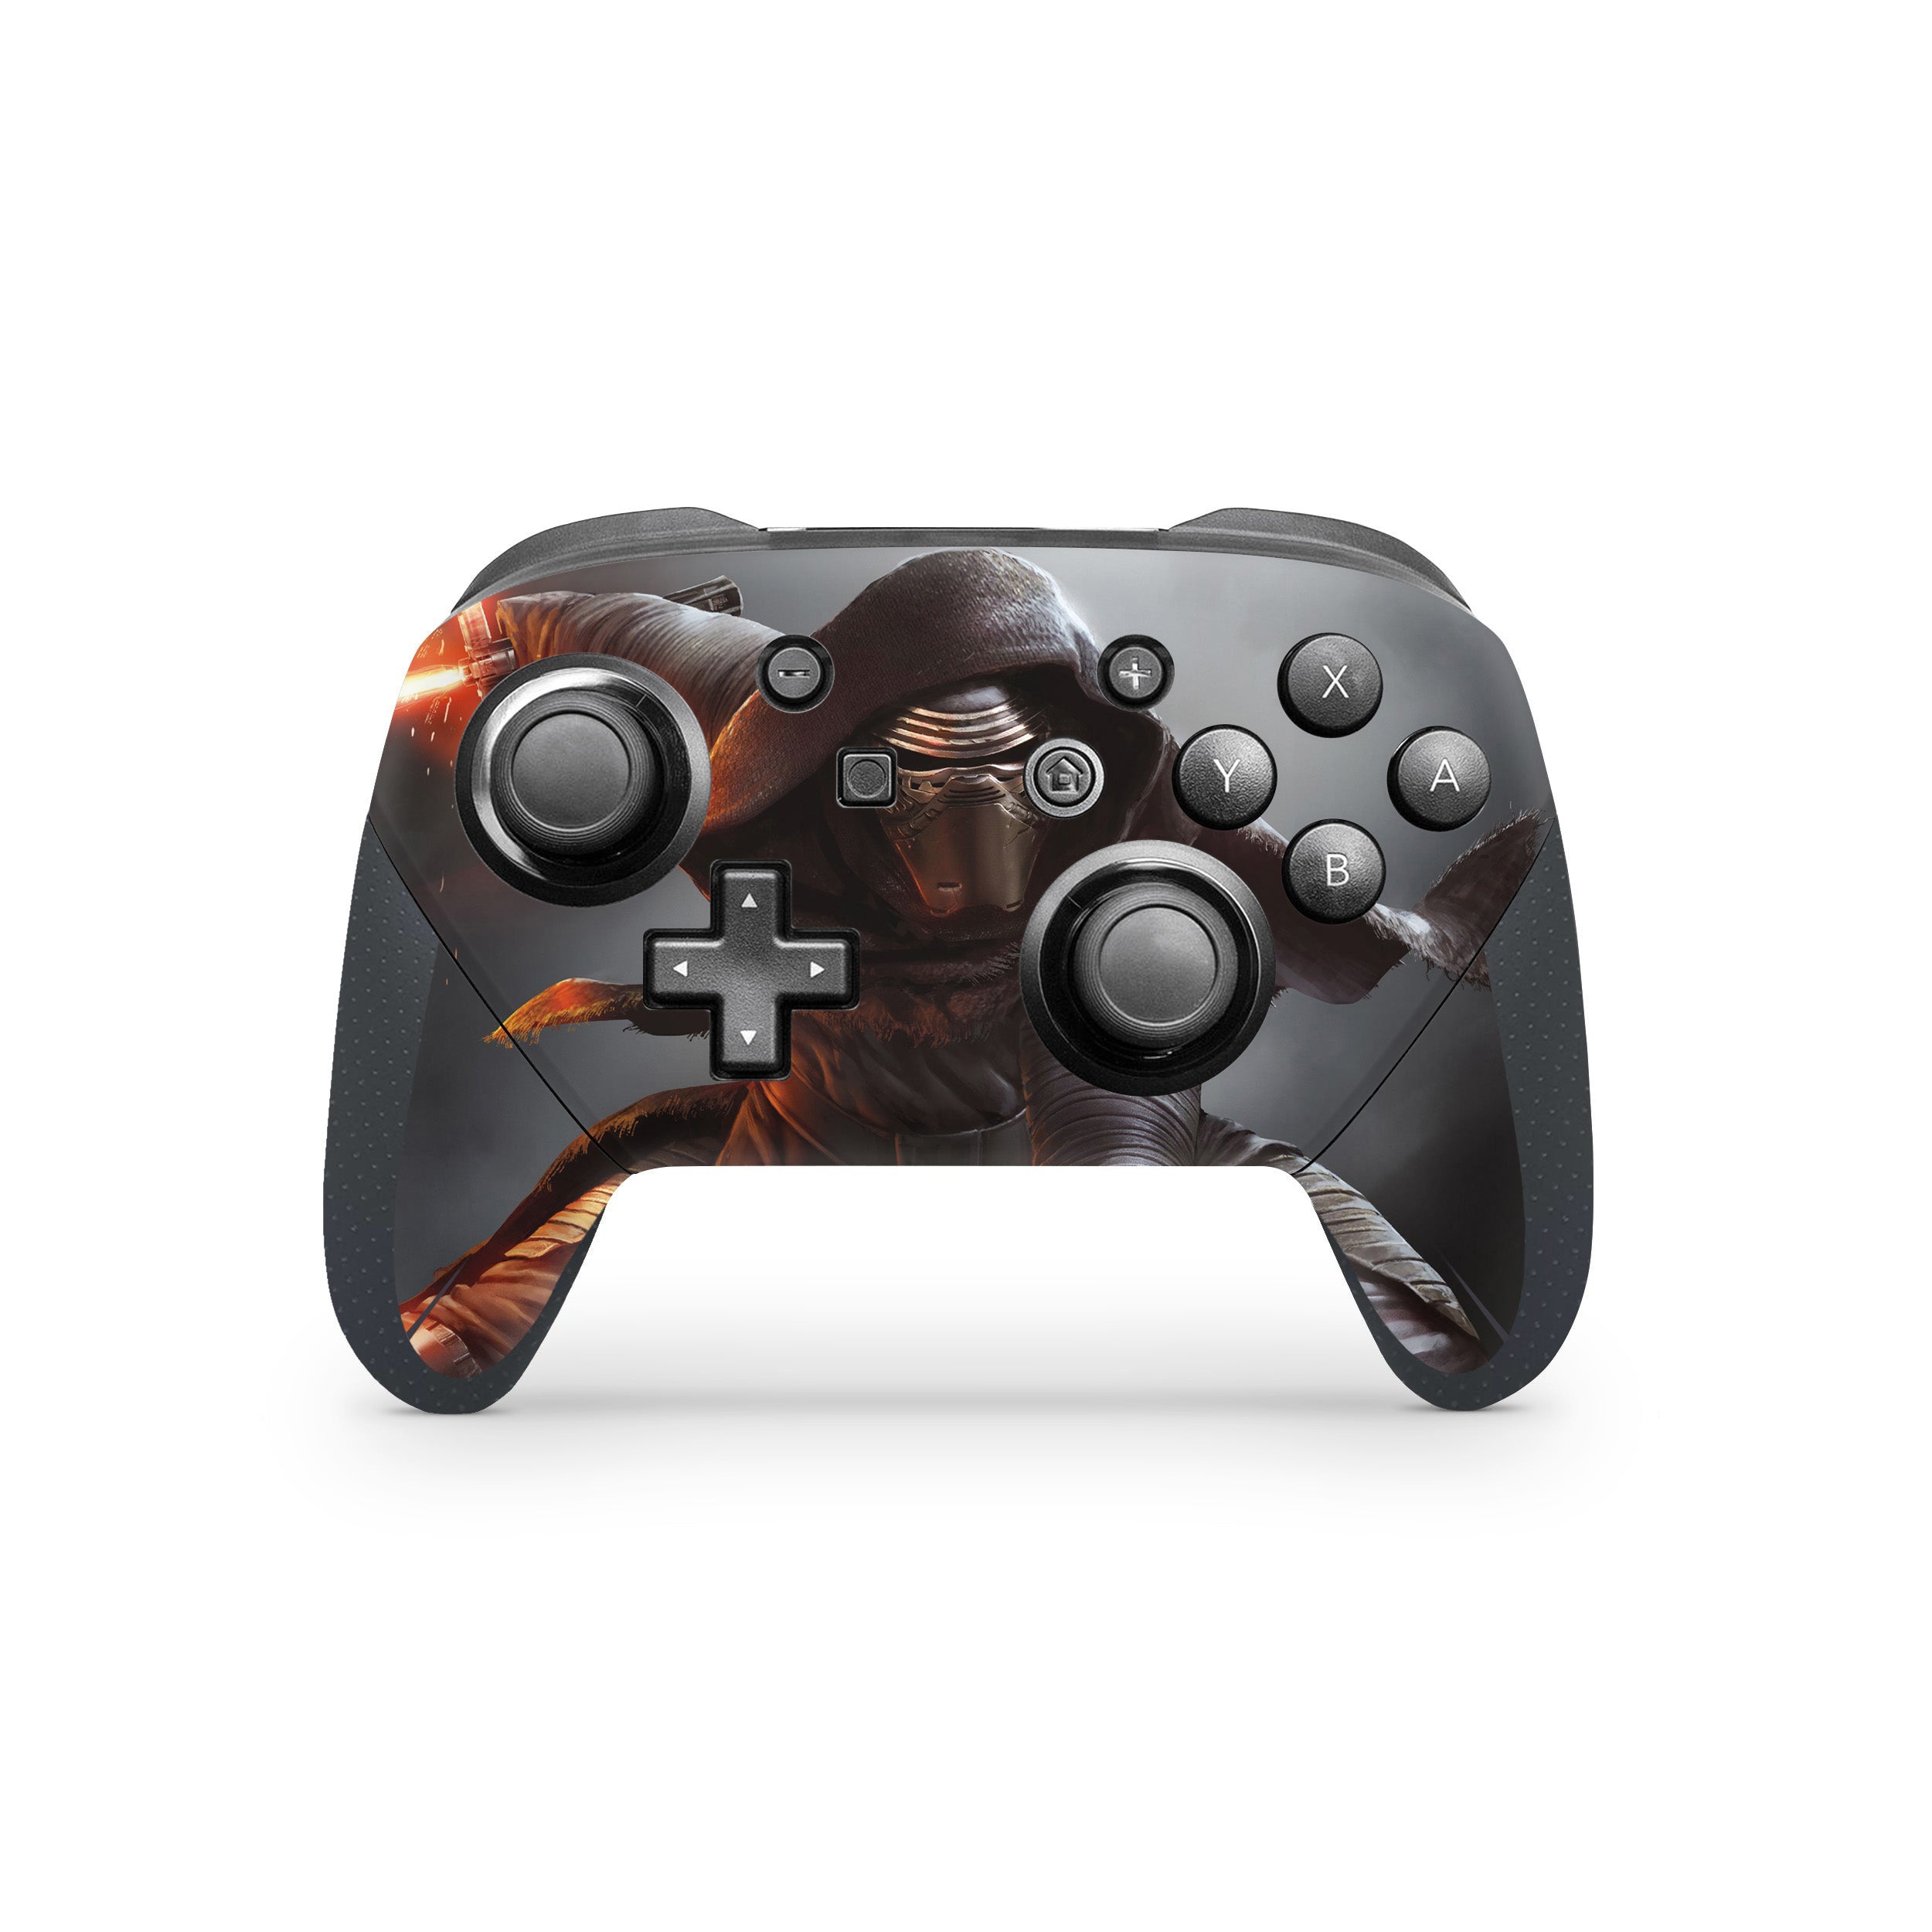 A video game skin featuring a Star Wars Kylo Ren design for the Switch Pro Controller.